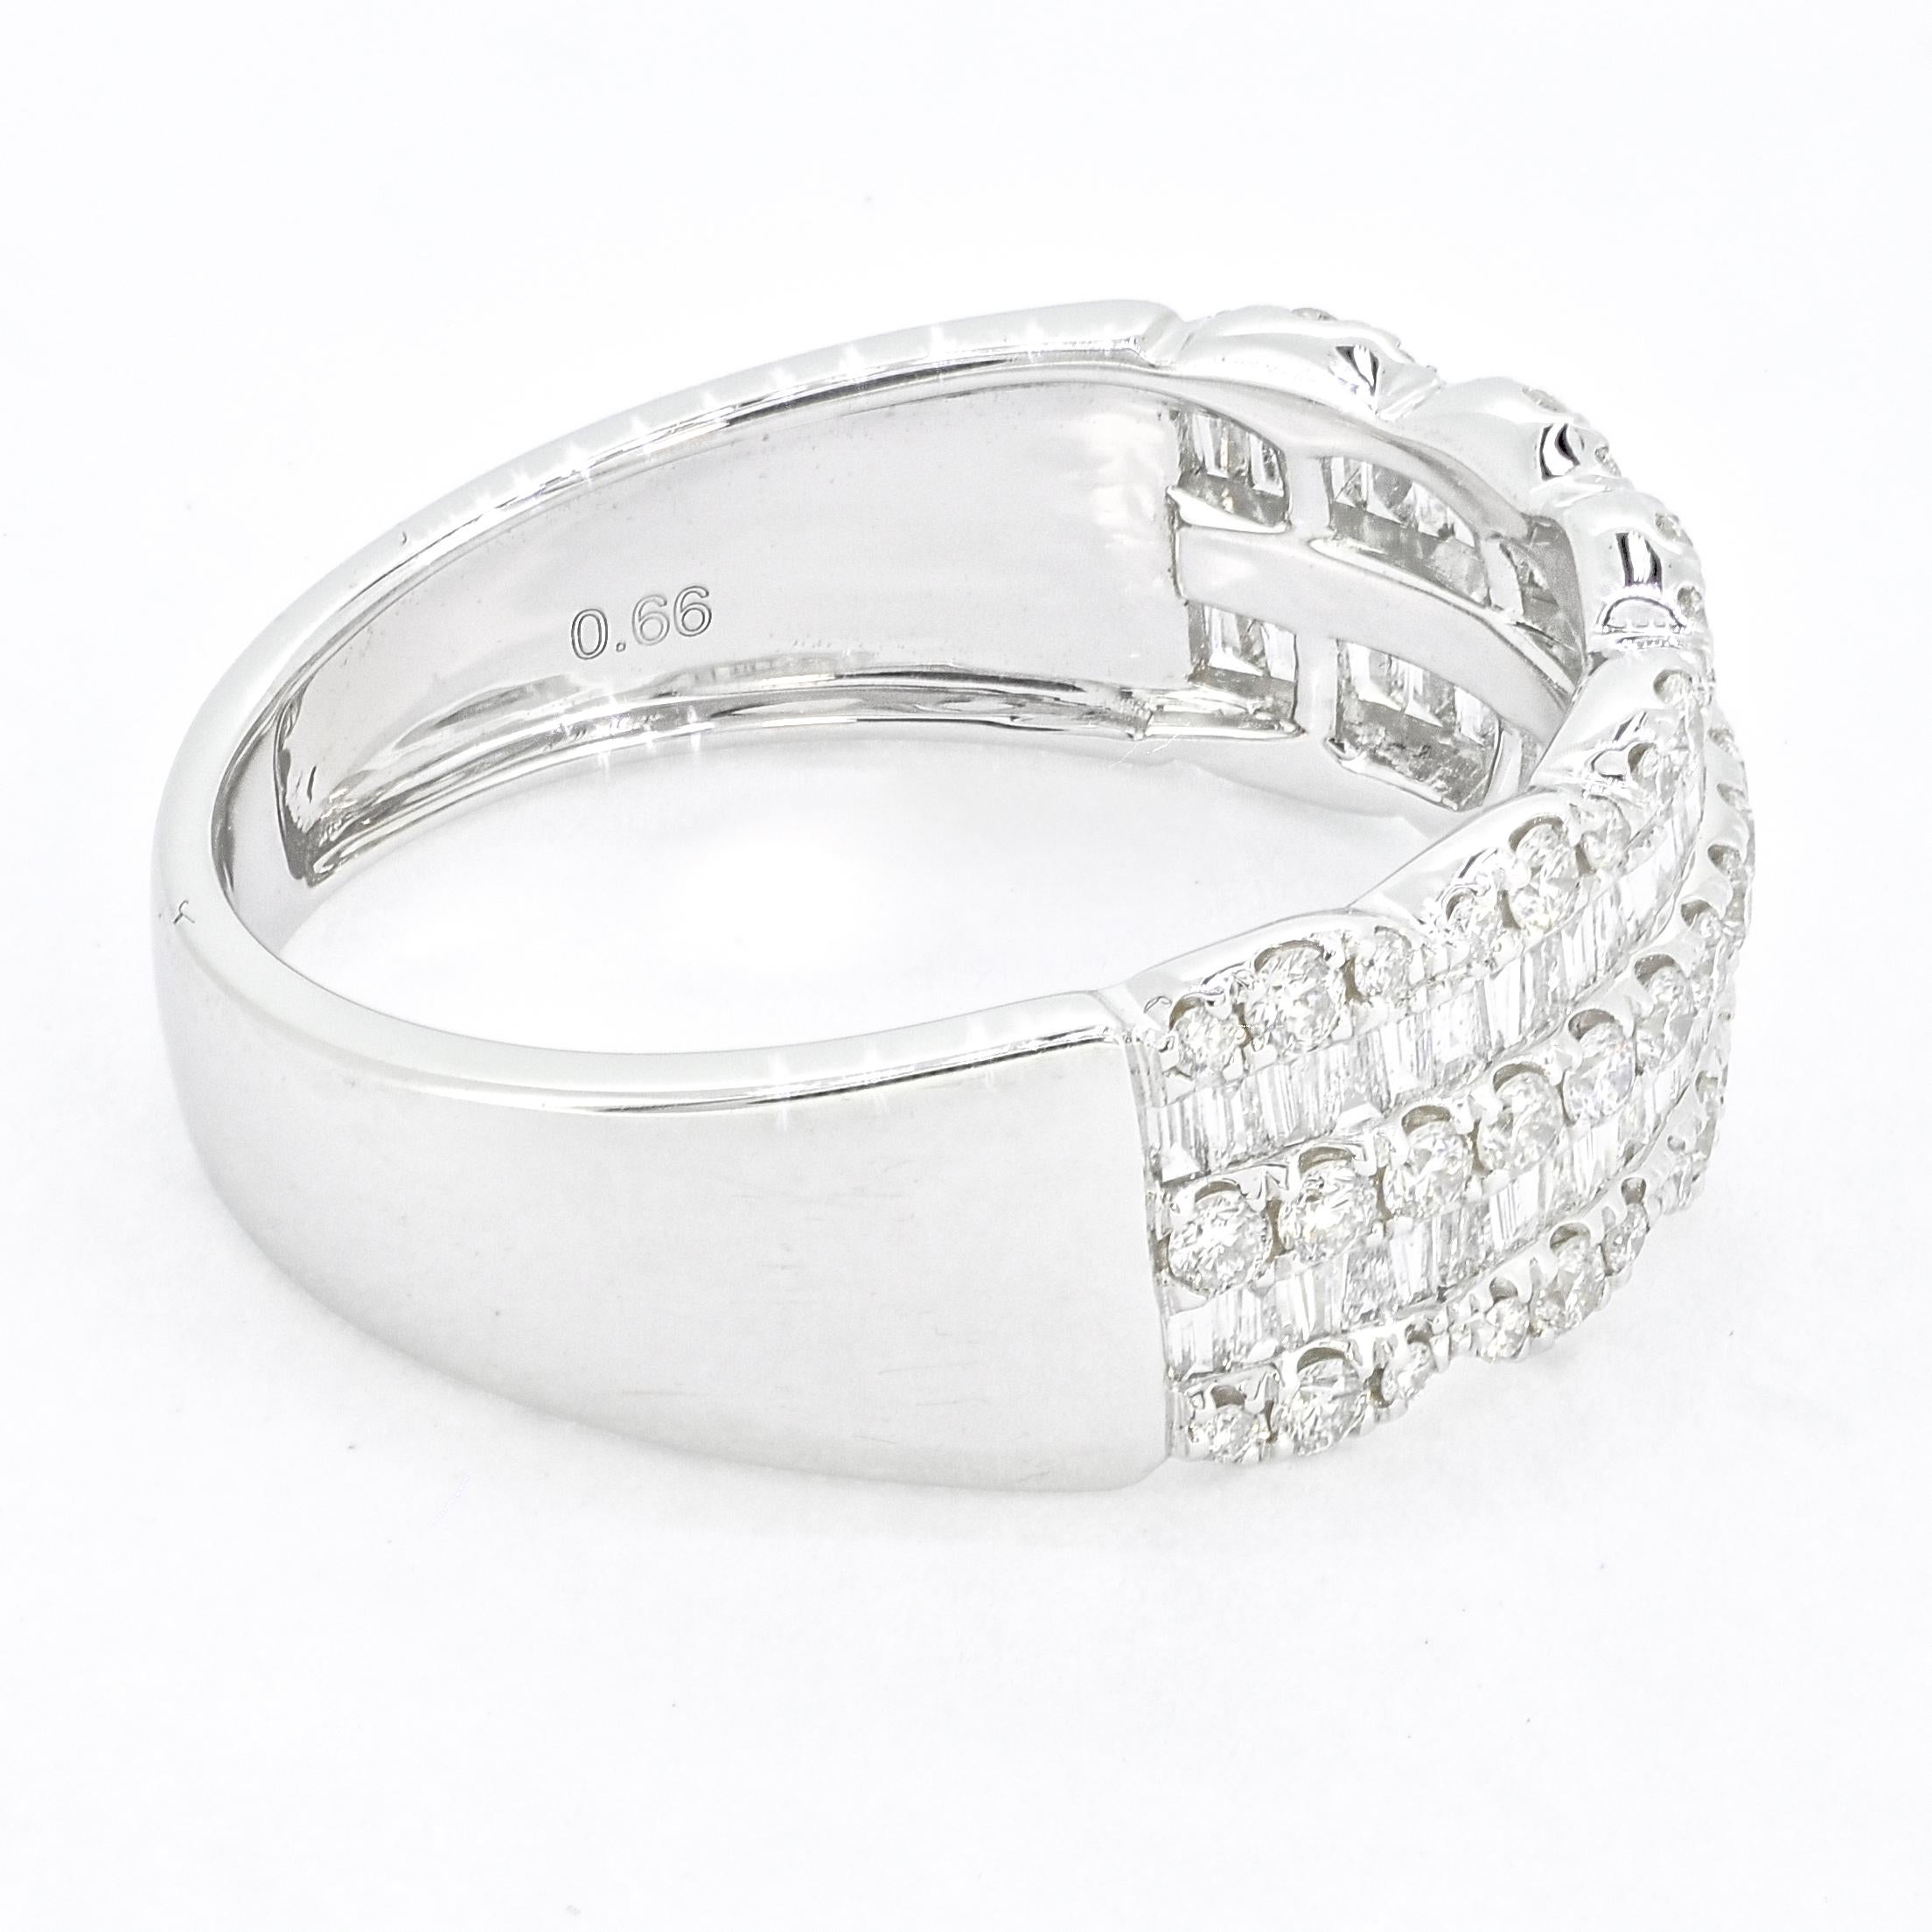 If you're looking for a beautiful and versatile diamond band that can be worn alone or stacked with other rings, consider a baguette and round diamond channel set 18 kt gold band. This exquisite piece features a row of alternating baguette and round